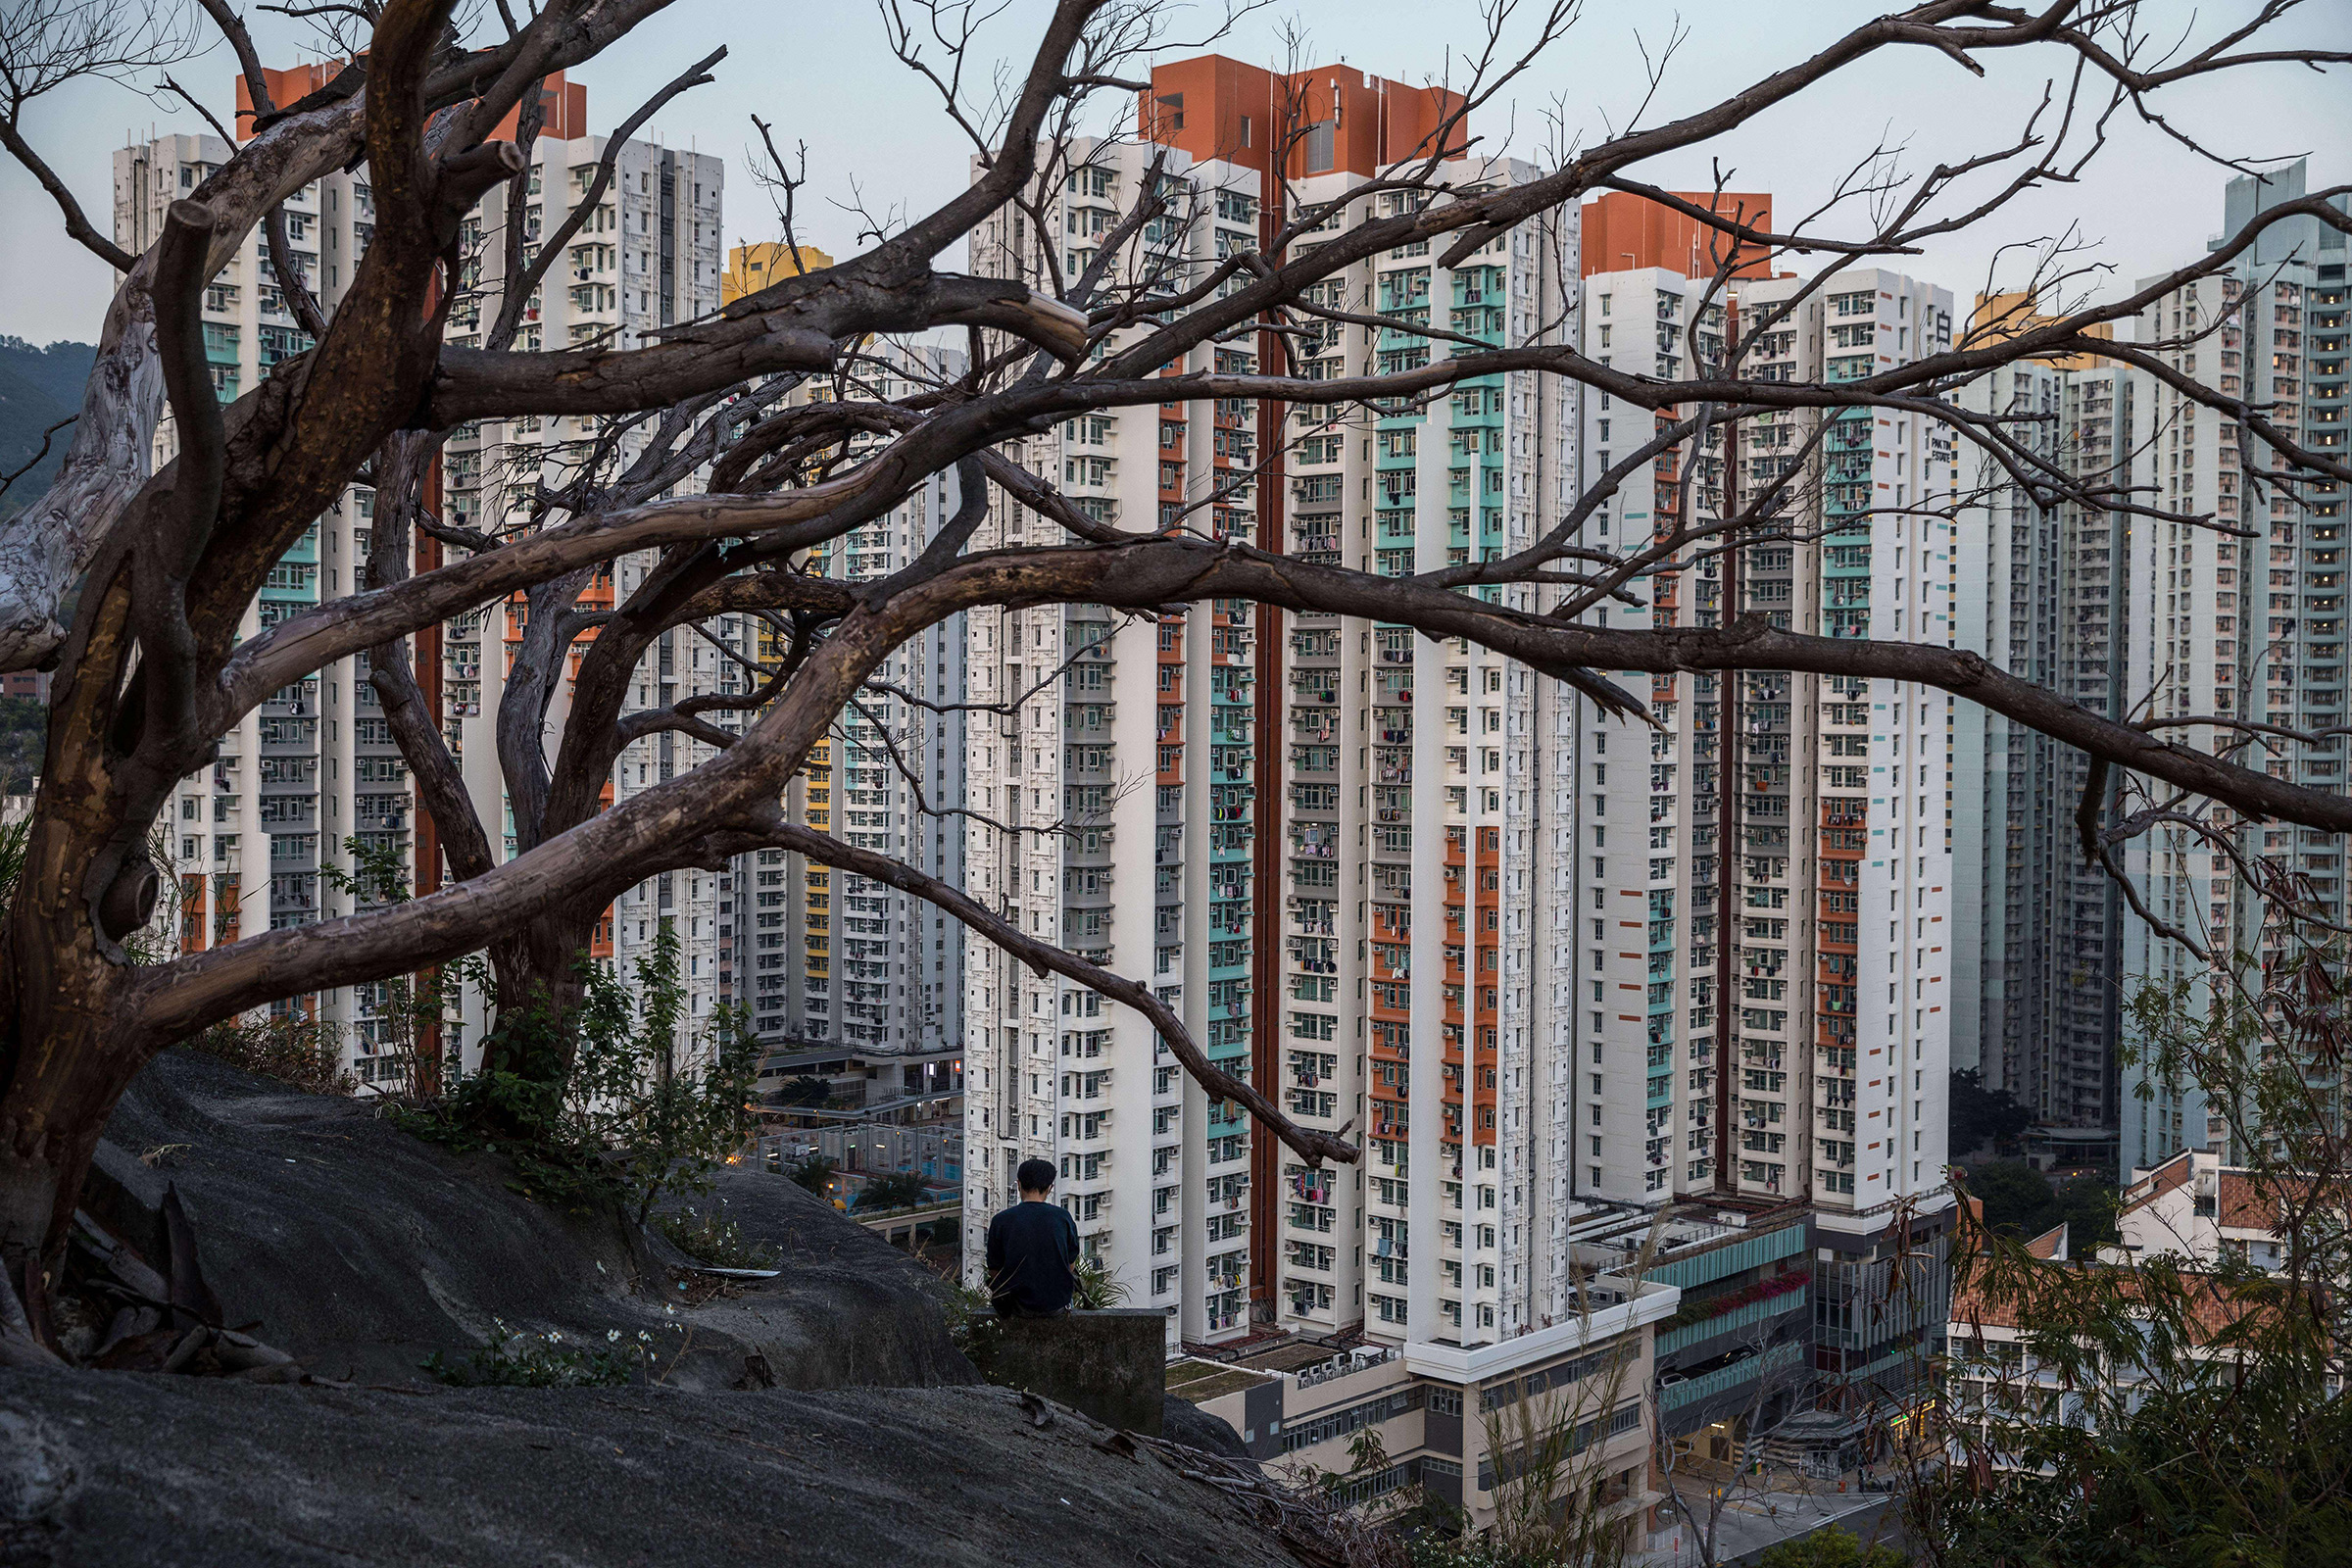 A man sits on a hill overlooking a residential estate in Hong Kong on March 4. COVID-19 has spread rapidly in the city's densely populated urban environment (Dale de la Rey—AFP/Getty Images)